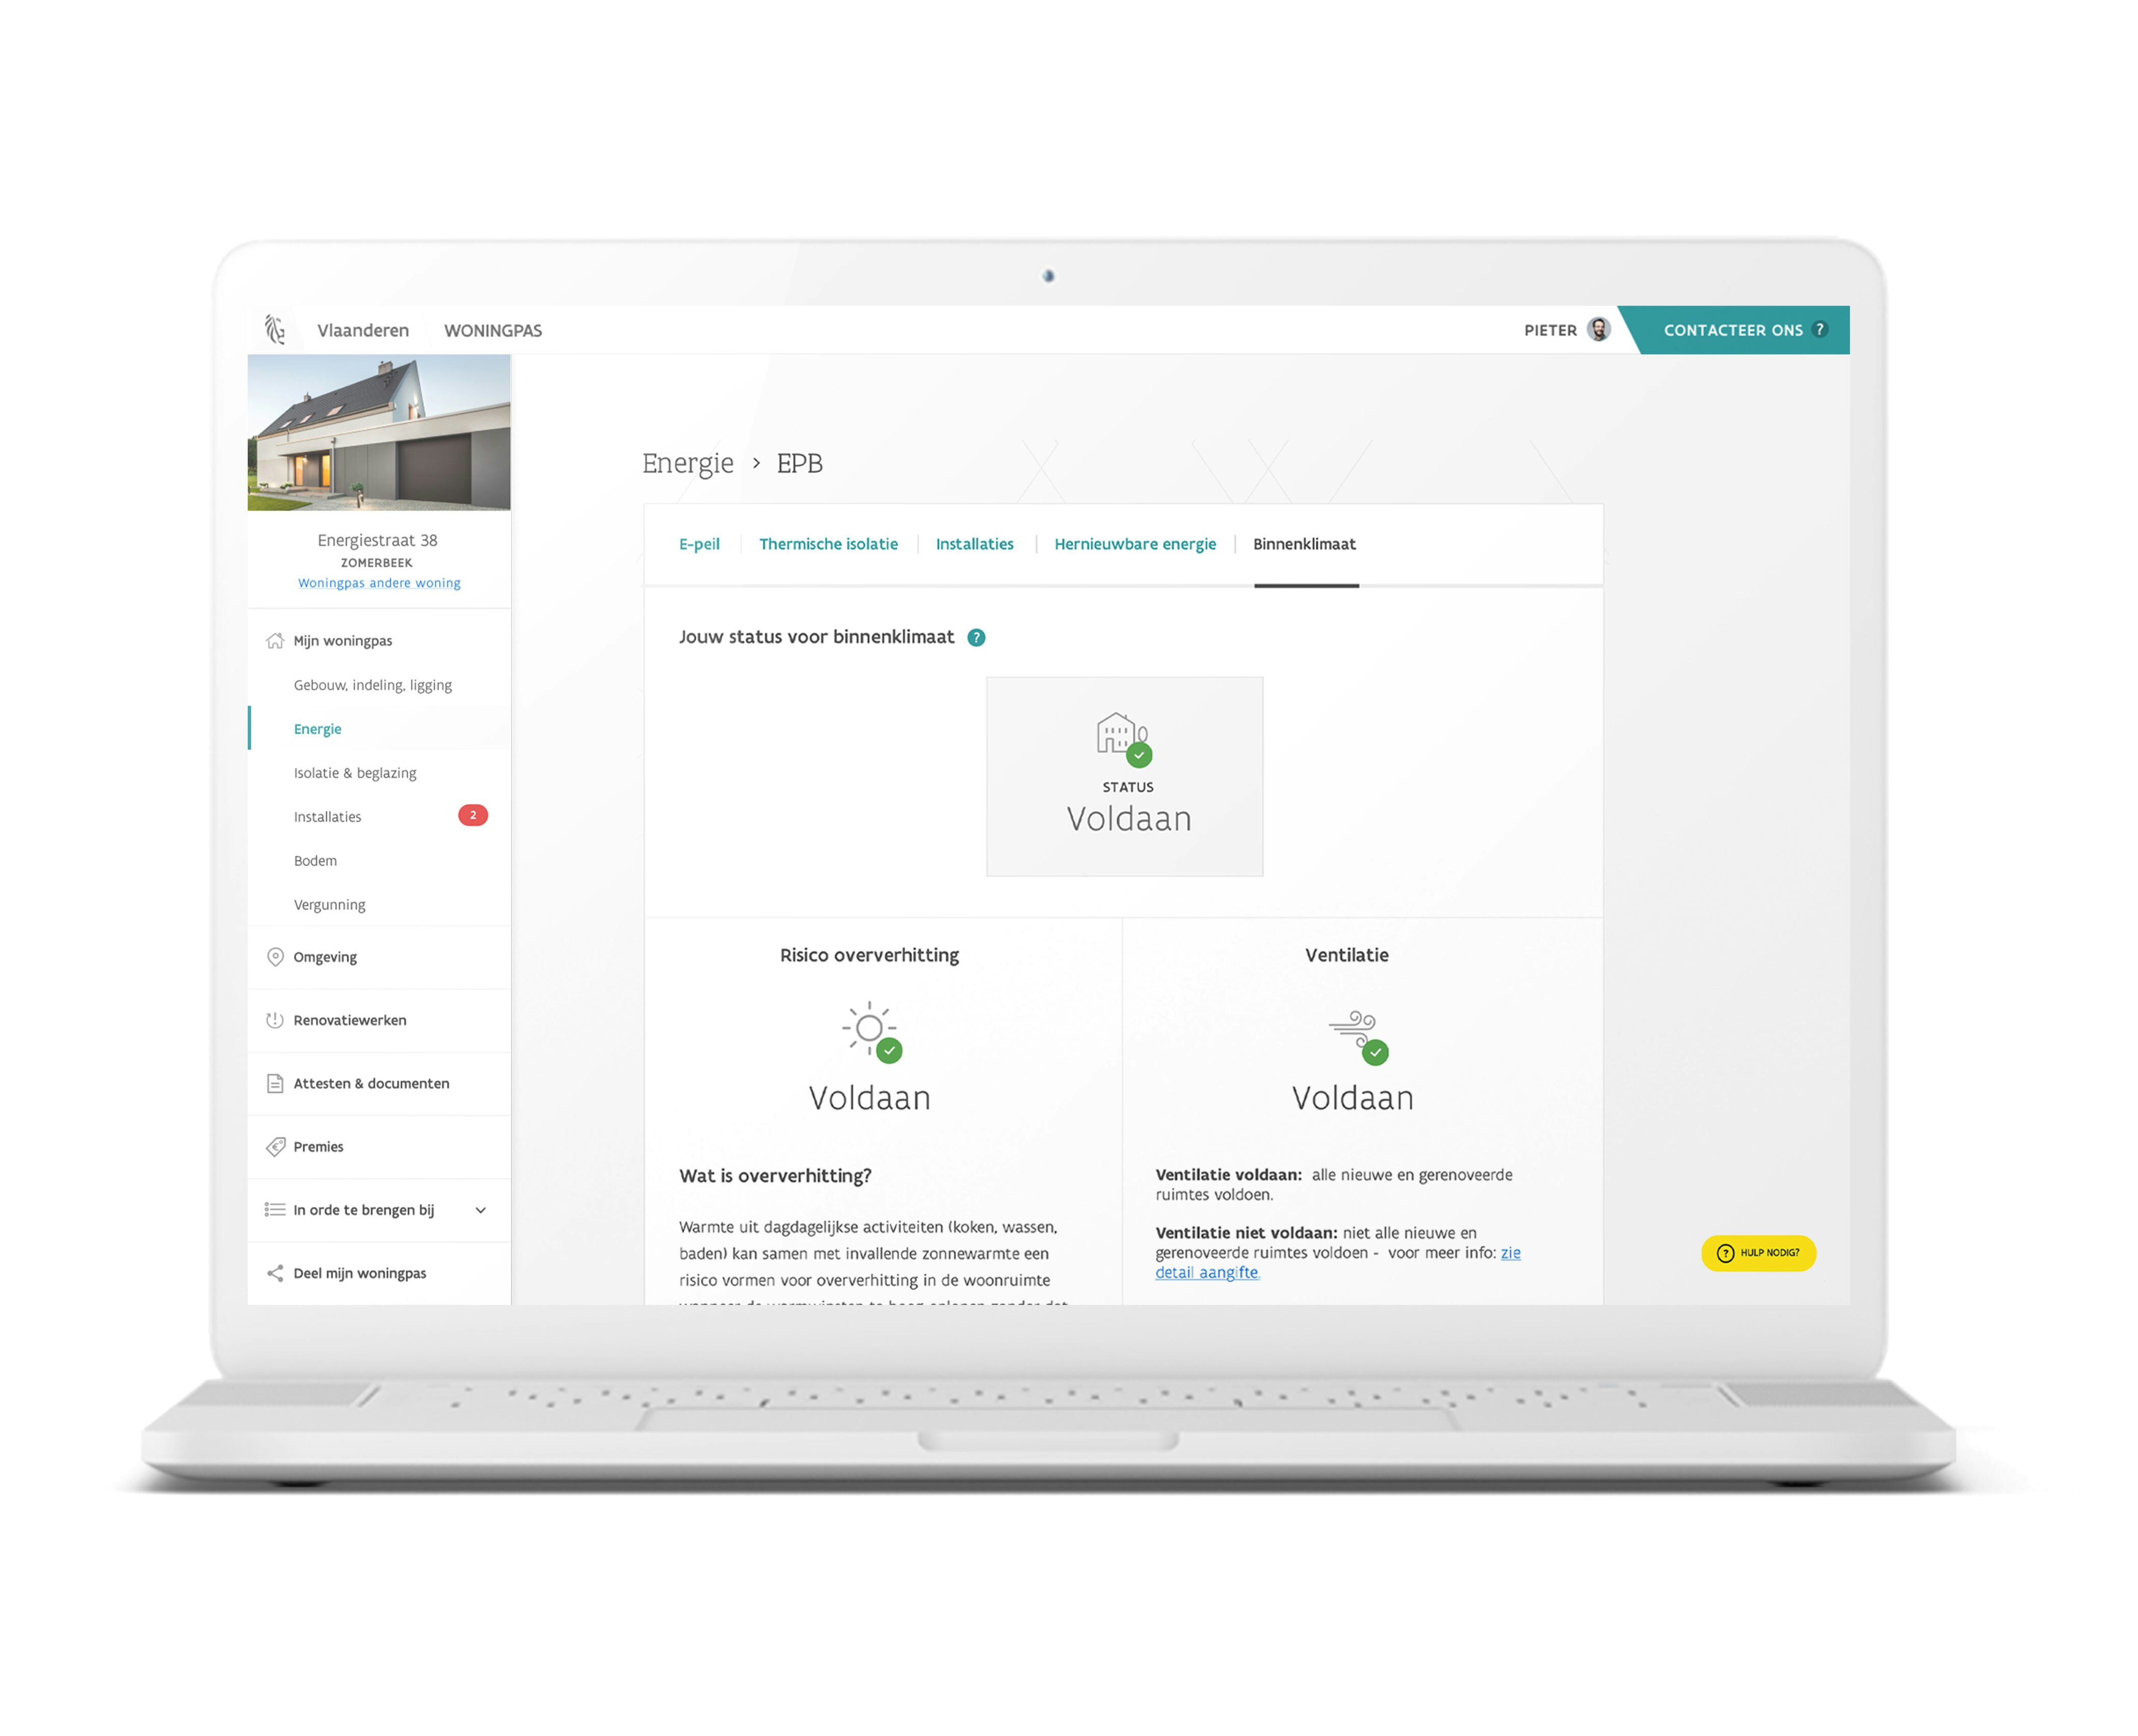 The woningpas is a digital passport for residences in Flanders